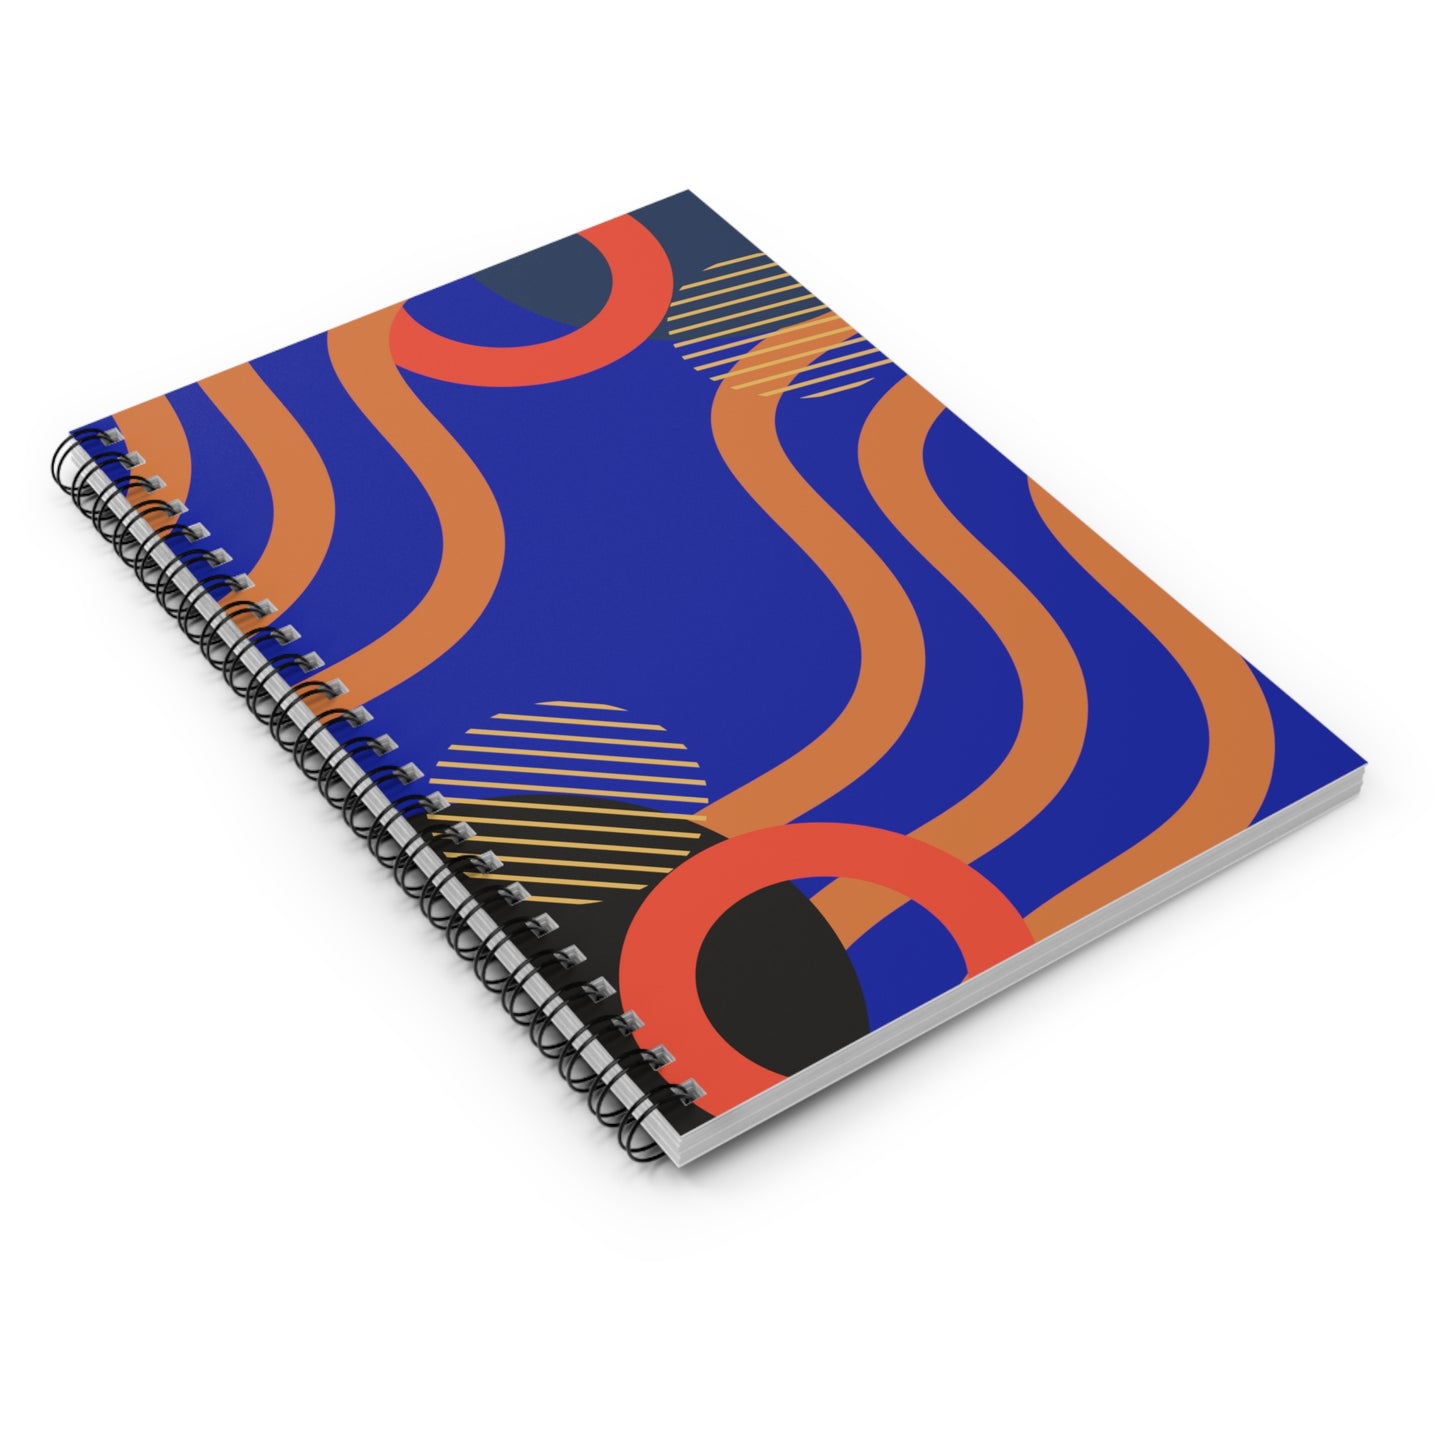 Entropy: Spiral Notebook - Log Books - Journals - Diaries - and More Custom Printed by TheGlassyLass